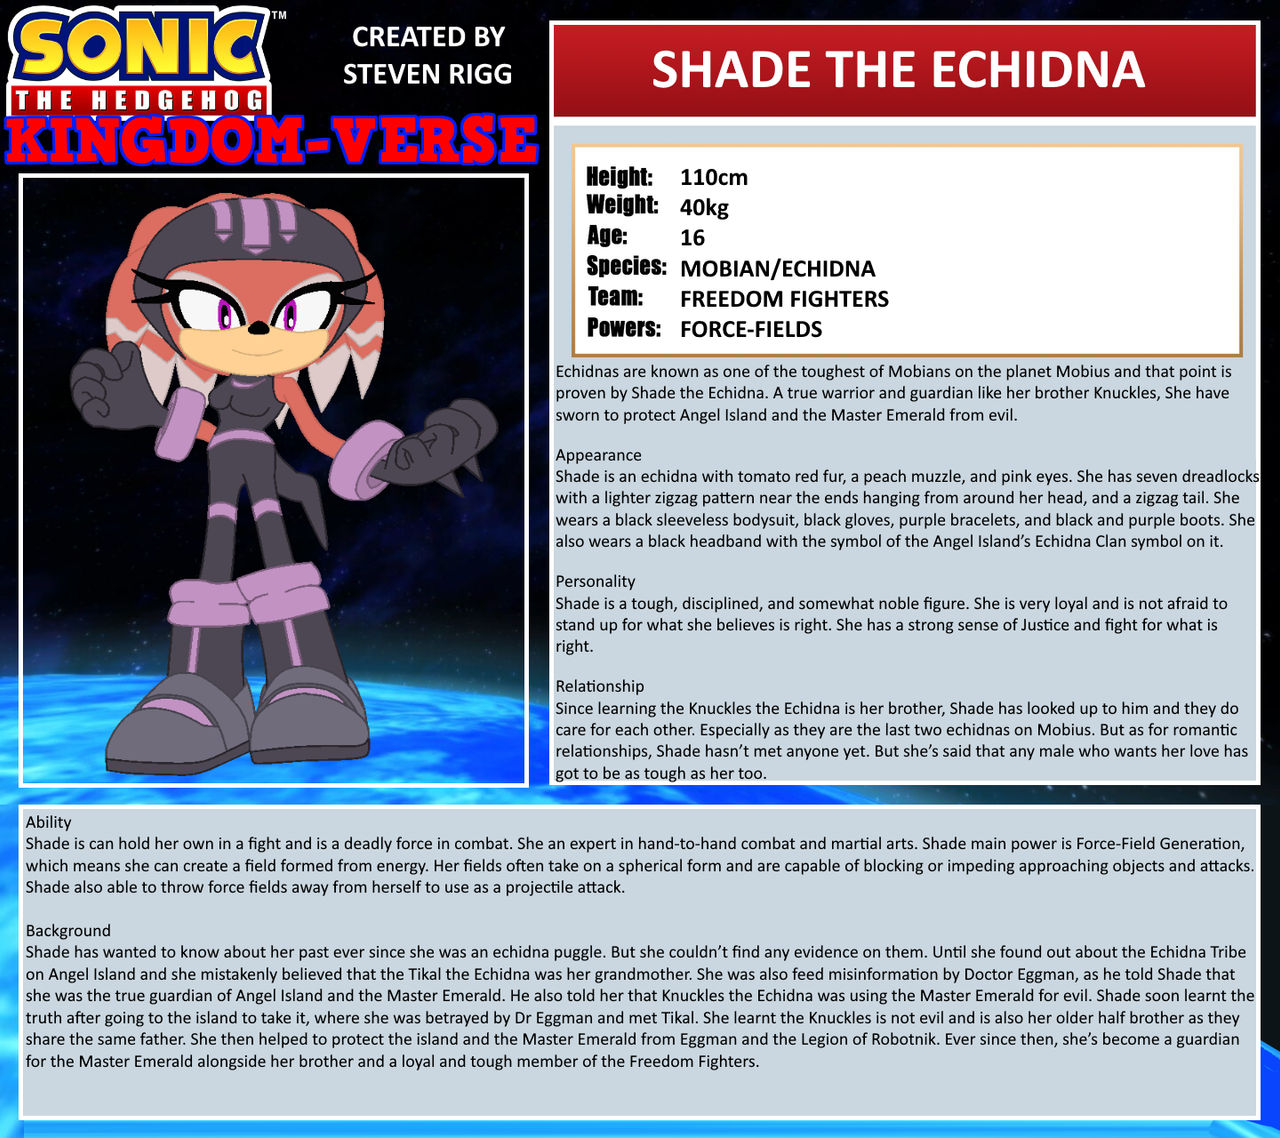 Ken Penders Wants To Incorporate Elements of Shade's Backstory